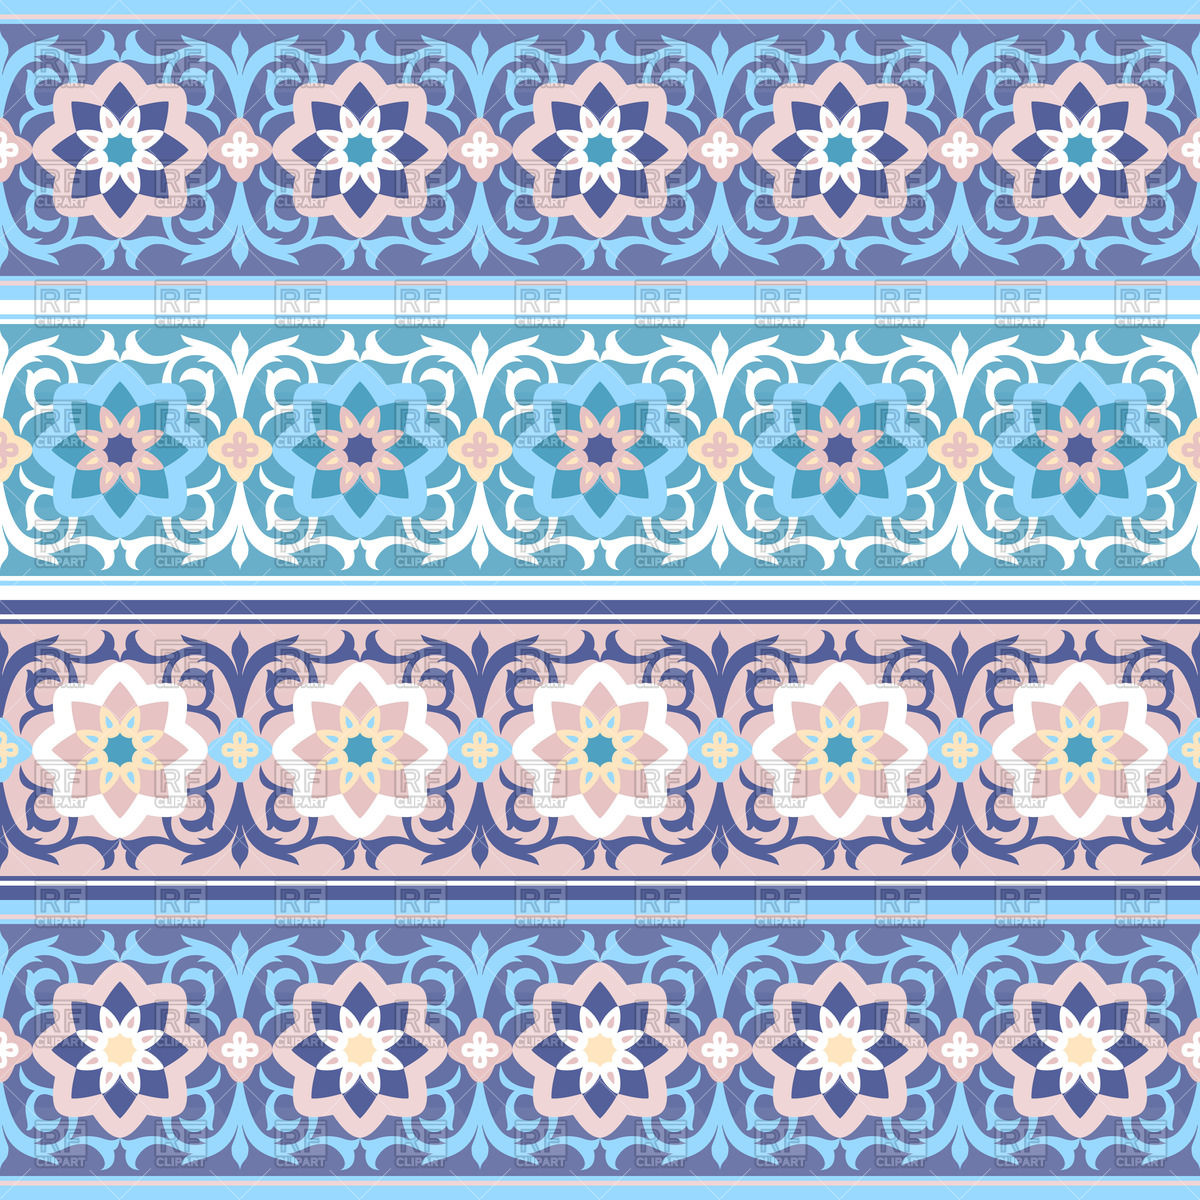      Islimi Or Arabesque  Download Royalty Free Vector Clipart  Eps